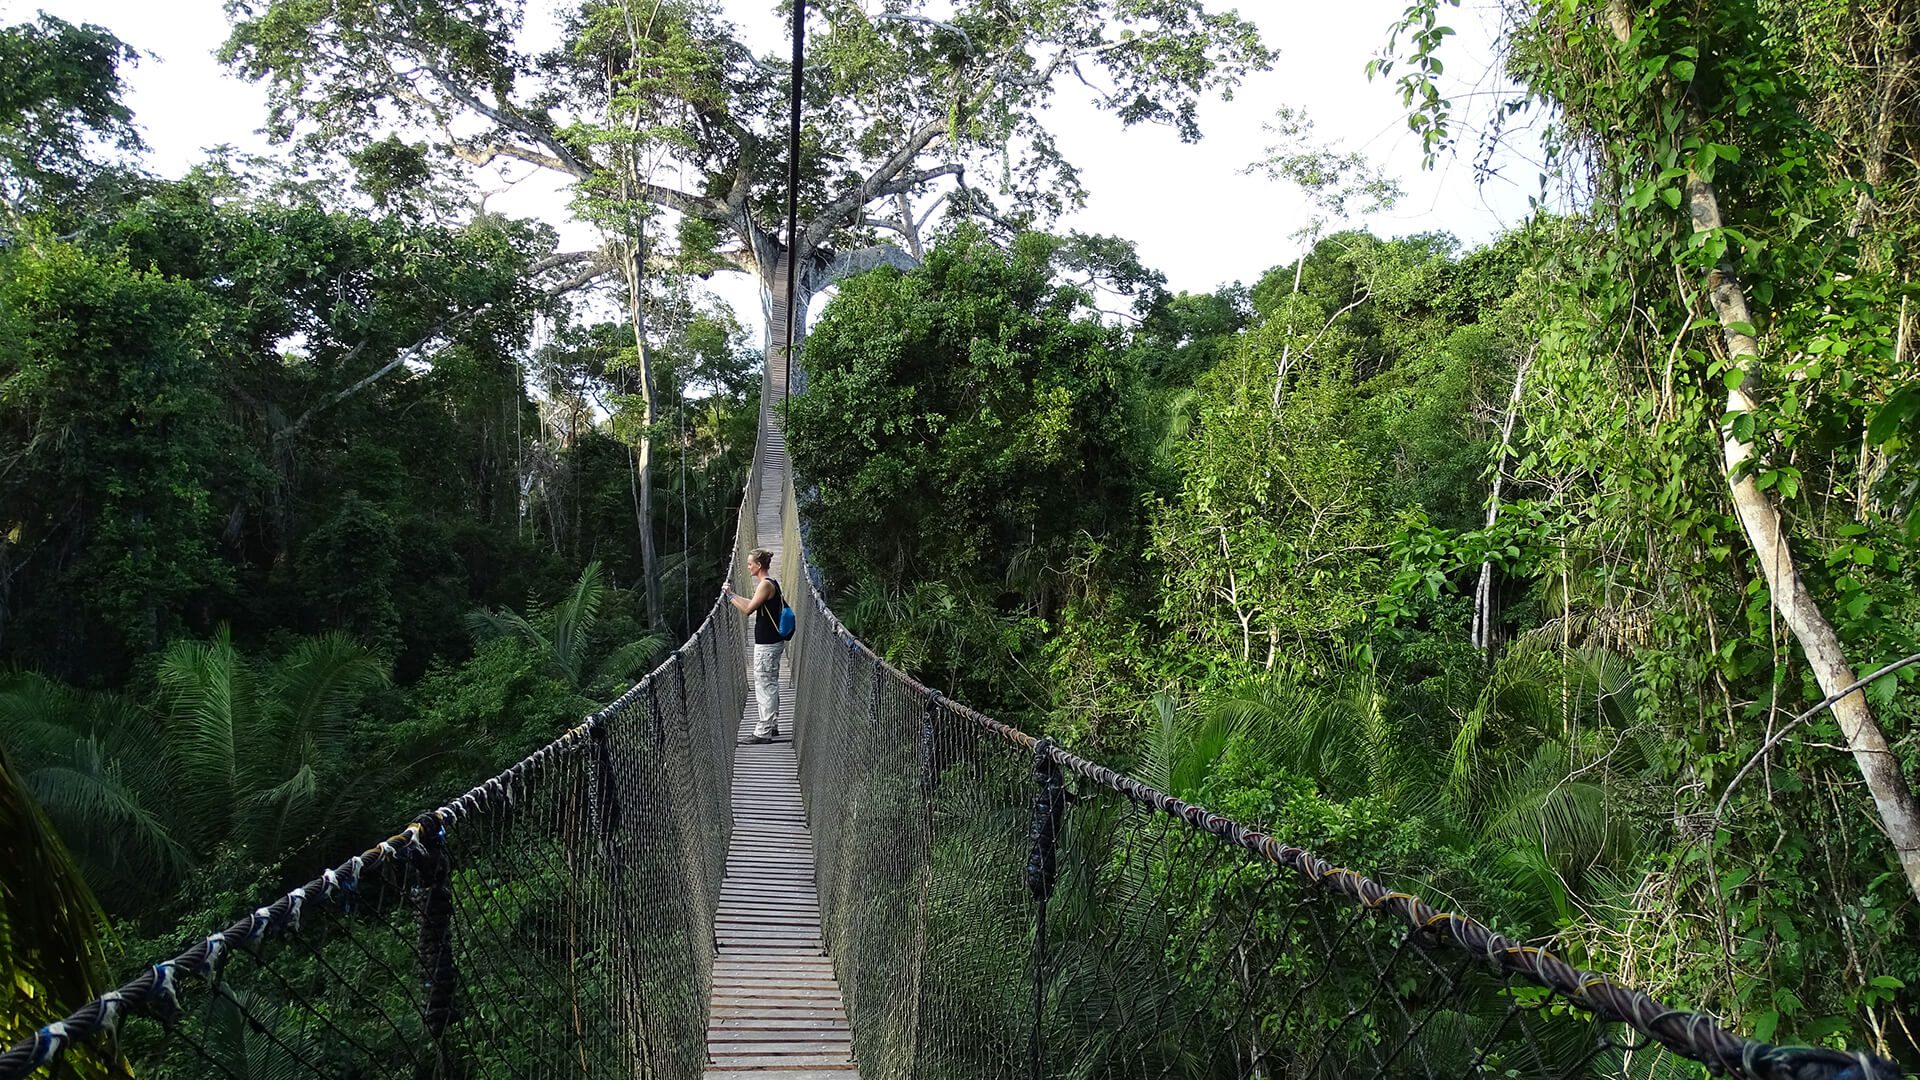 Agnes on the canopy bridge, on her way to joining the birds in the treetops. | Amazon tours with Impactful Travel